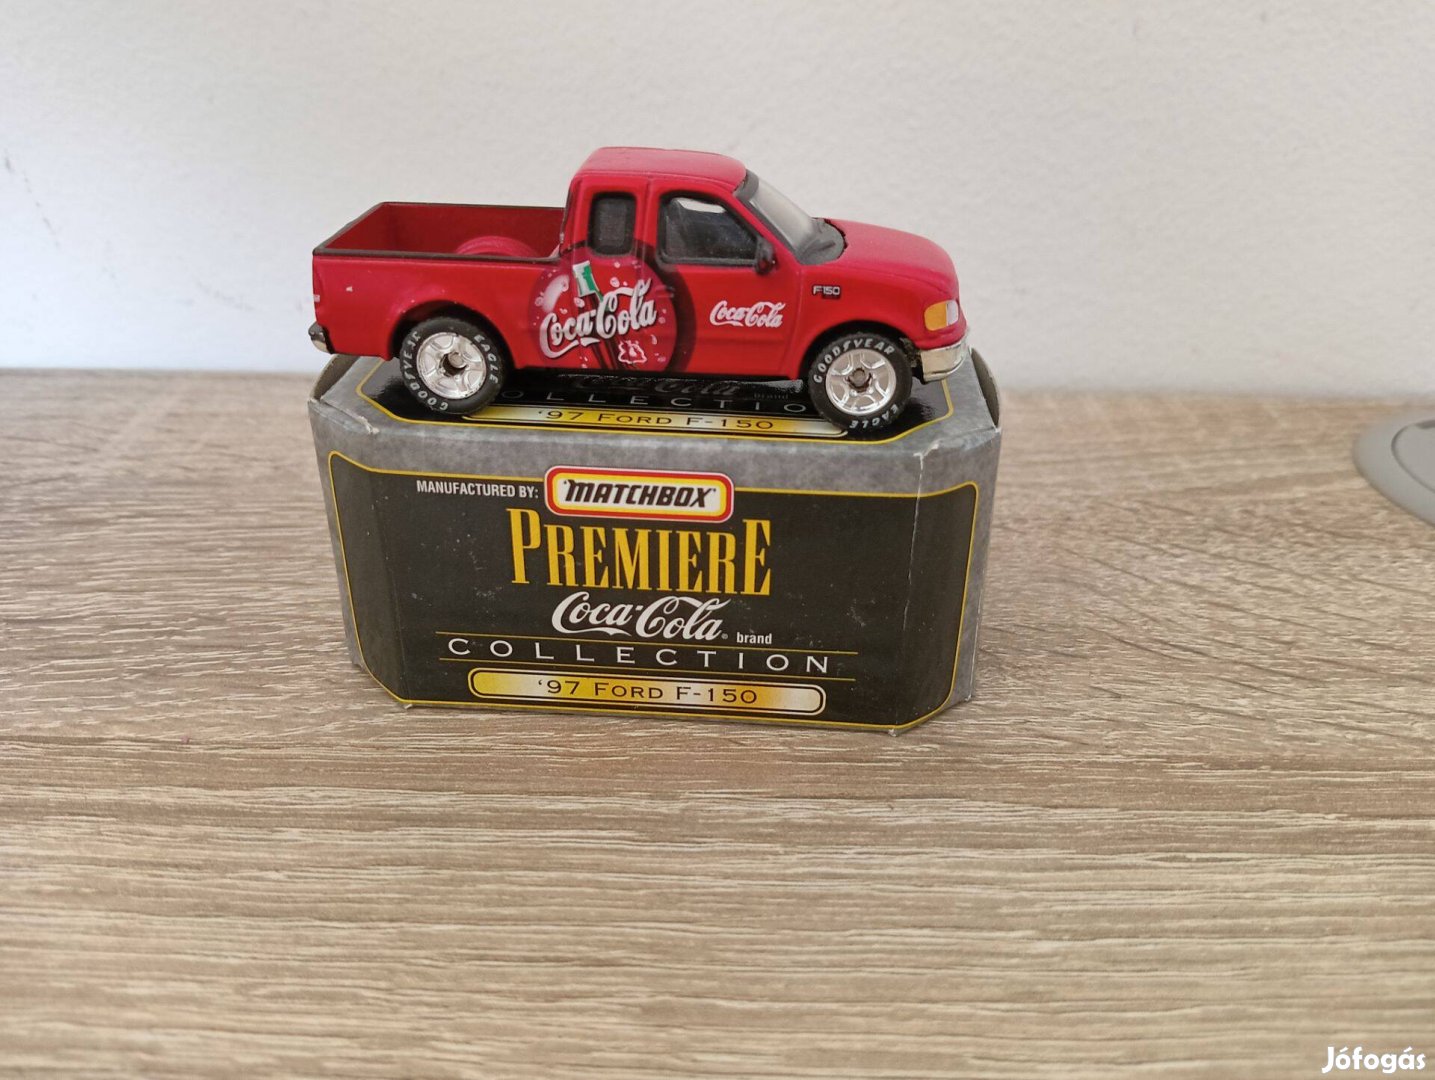 Matchbox Premier Collection Series 1 Coca Cola '97 Ford F-150